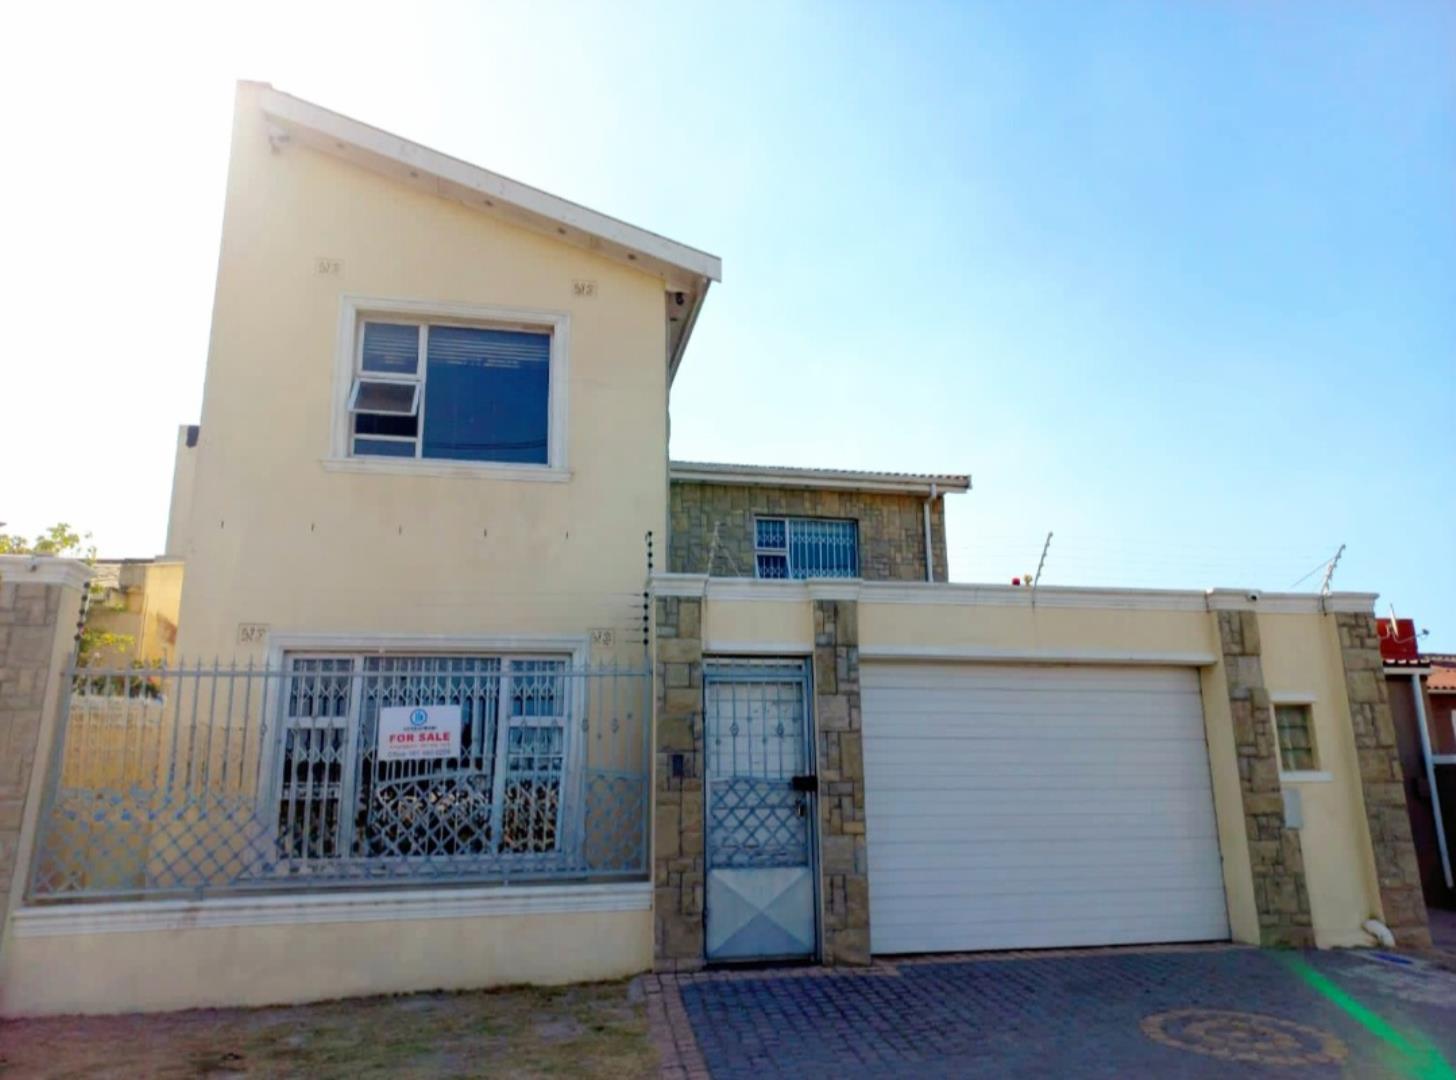 5 Bedroom House for Sale - Western Cape